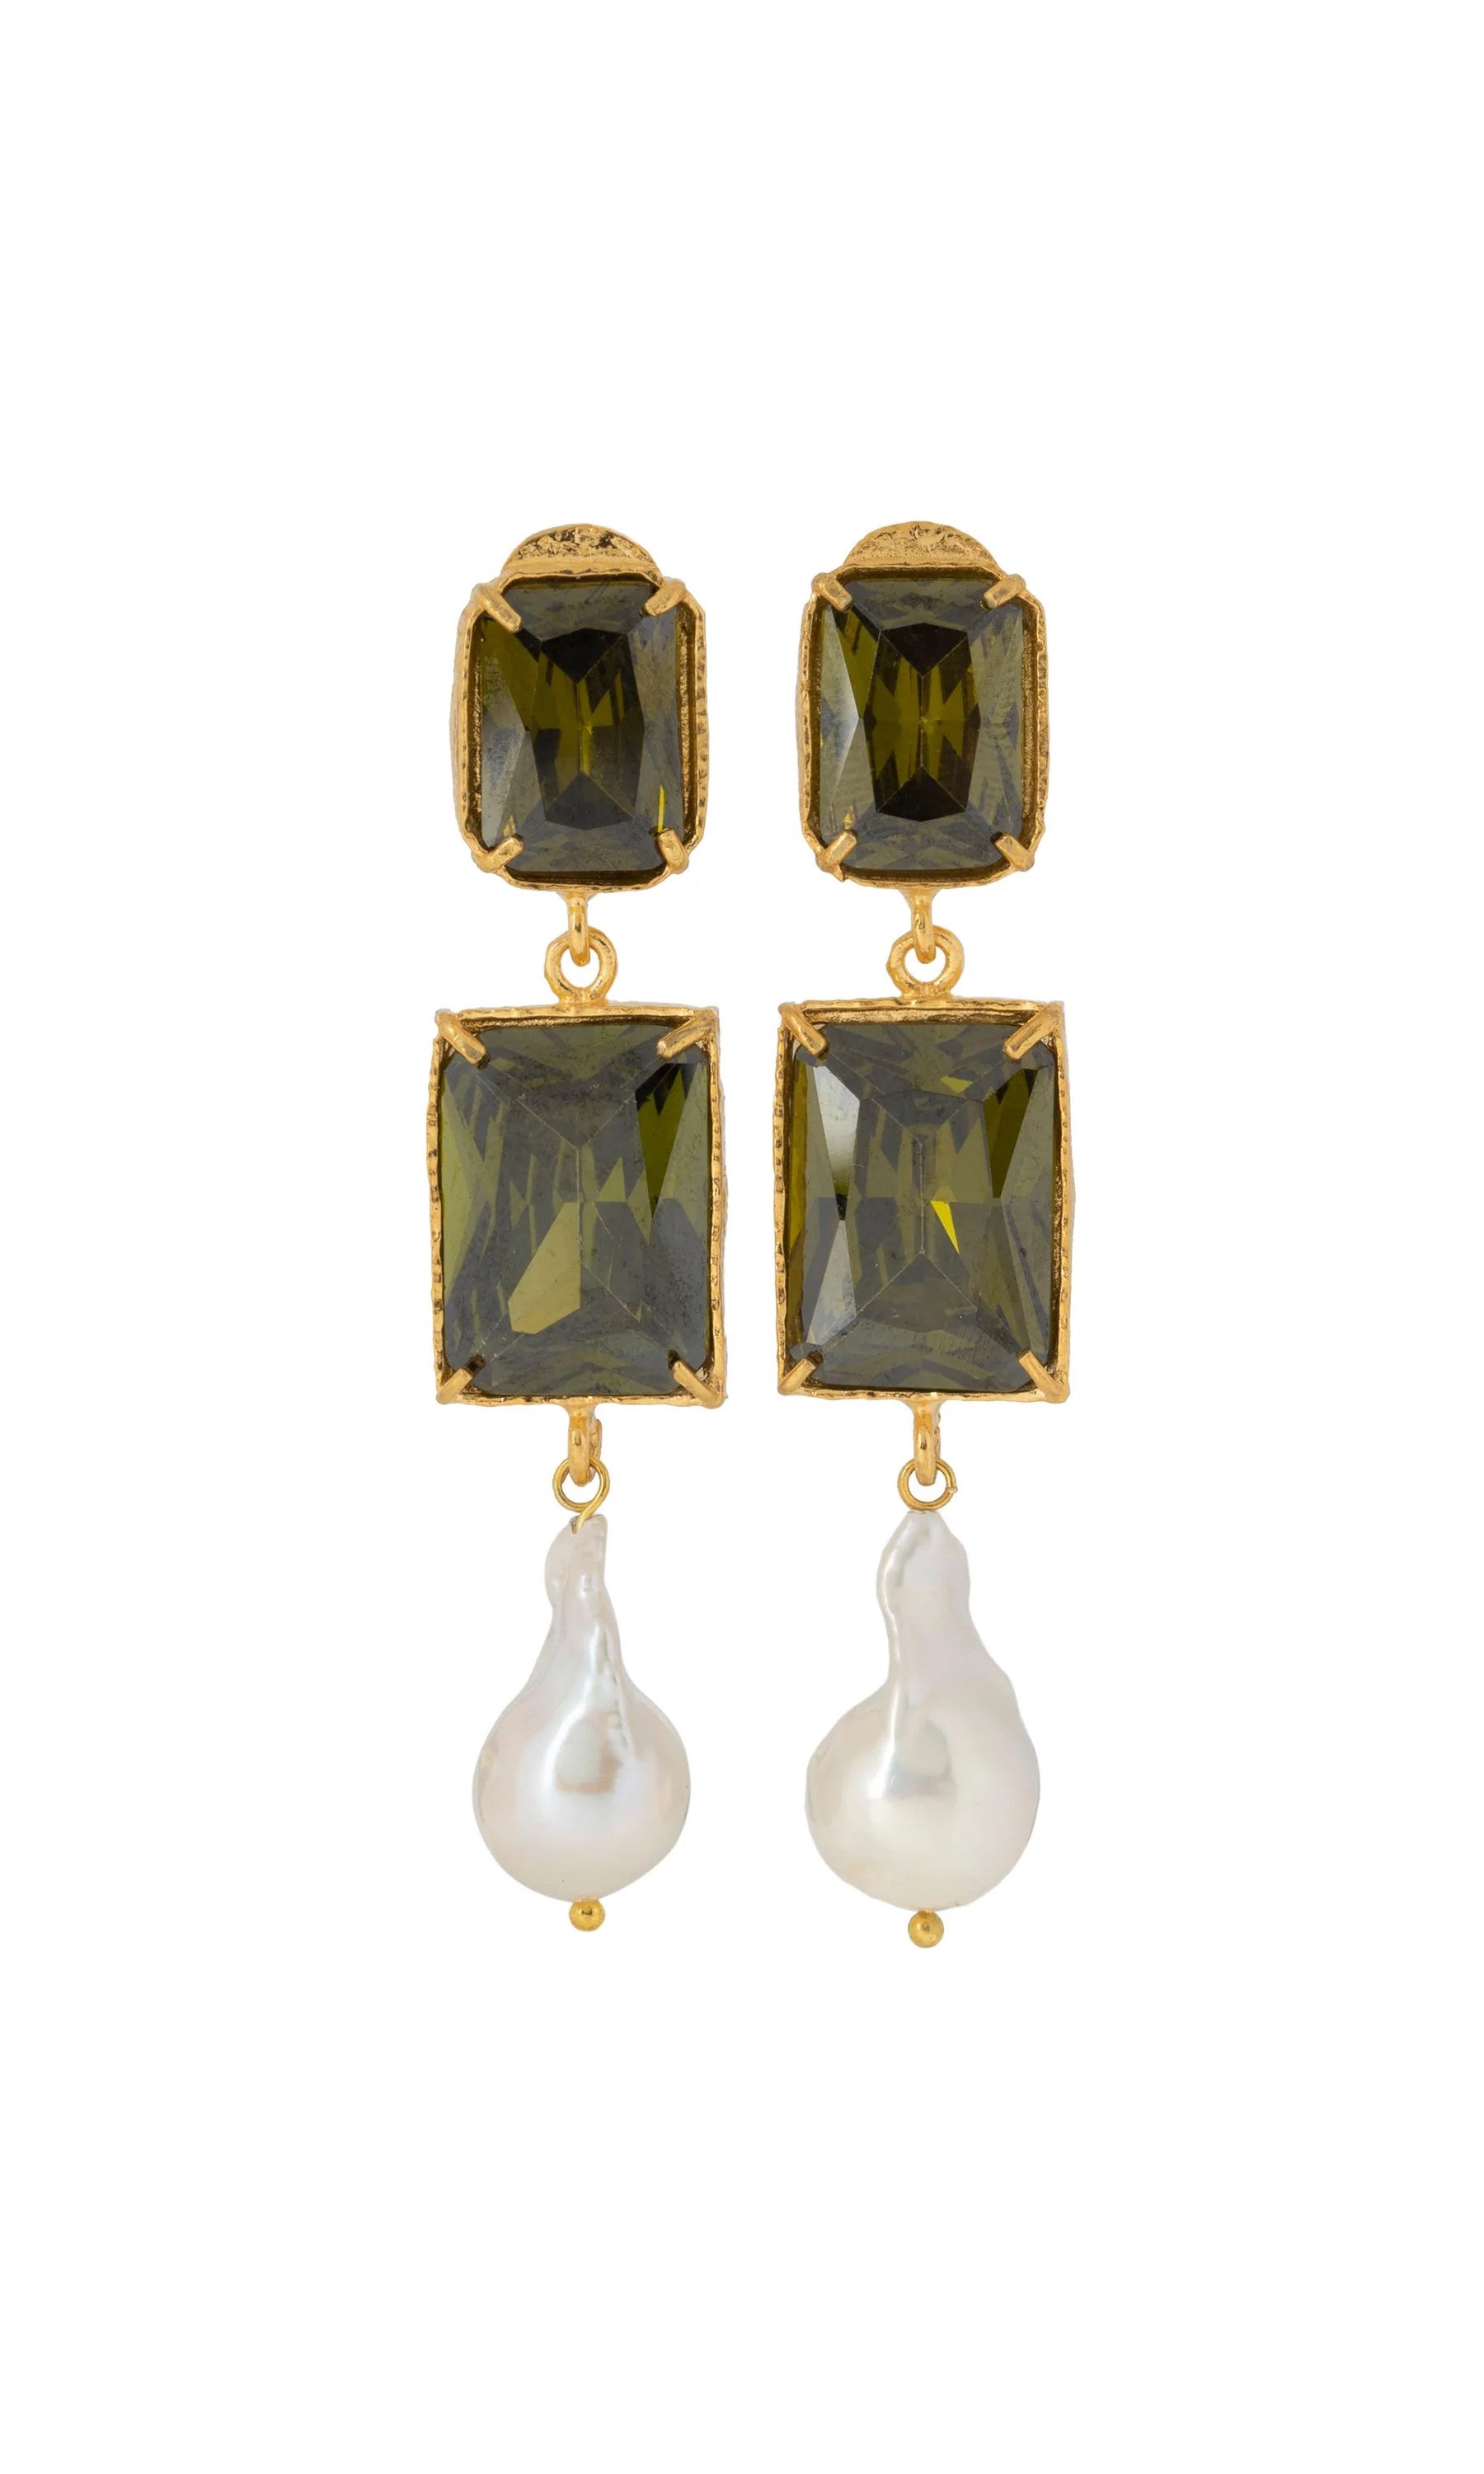 Christie Nicolaides Alice Earrings - Green